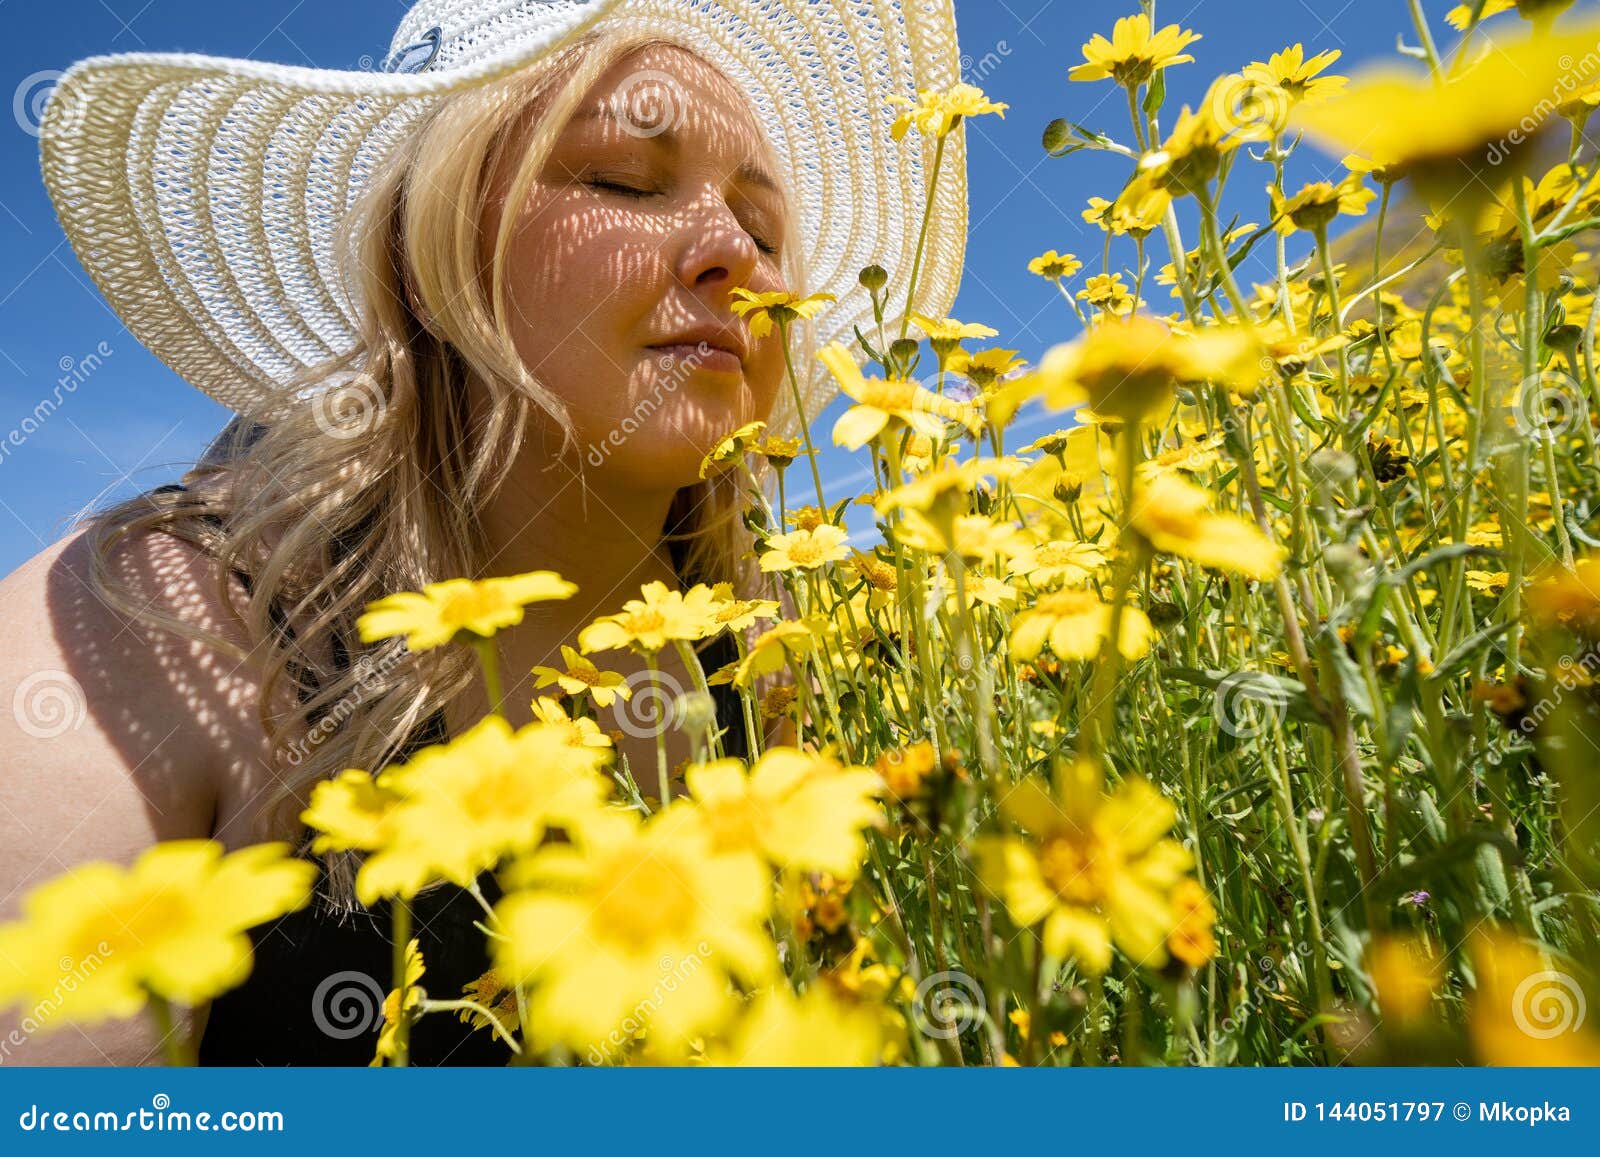 blonde woman wearing straw white hat smelling a field of yellow wildflowers. concept for springtime allergy relief